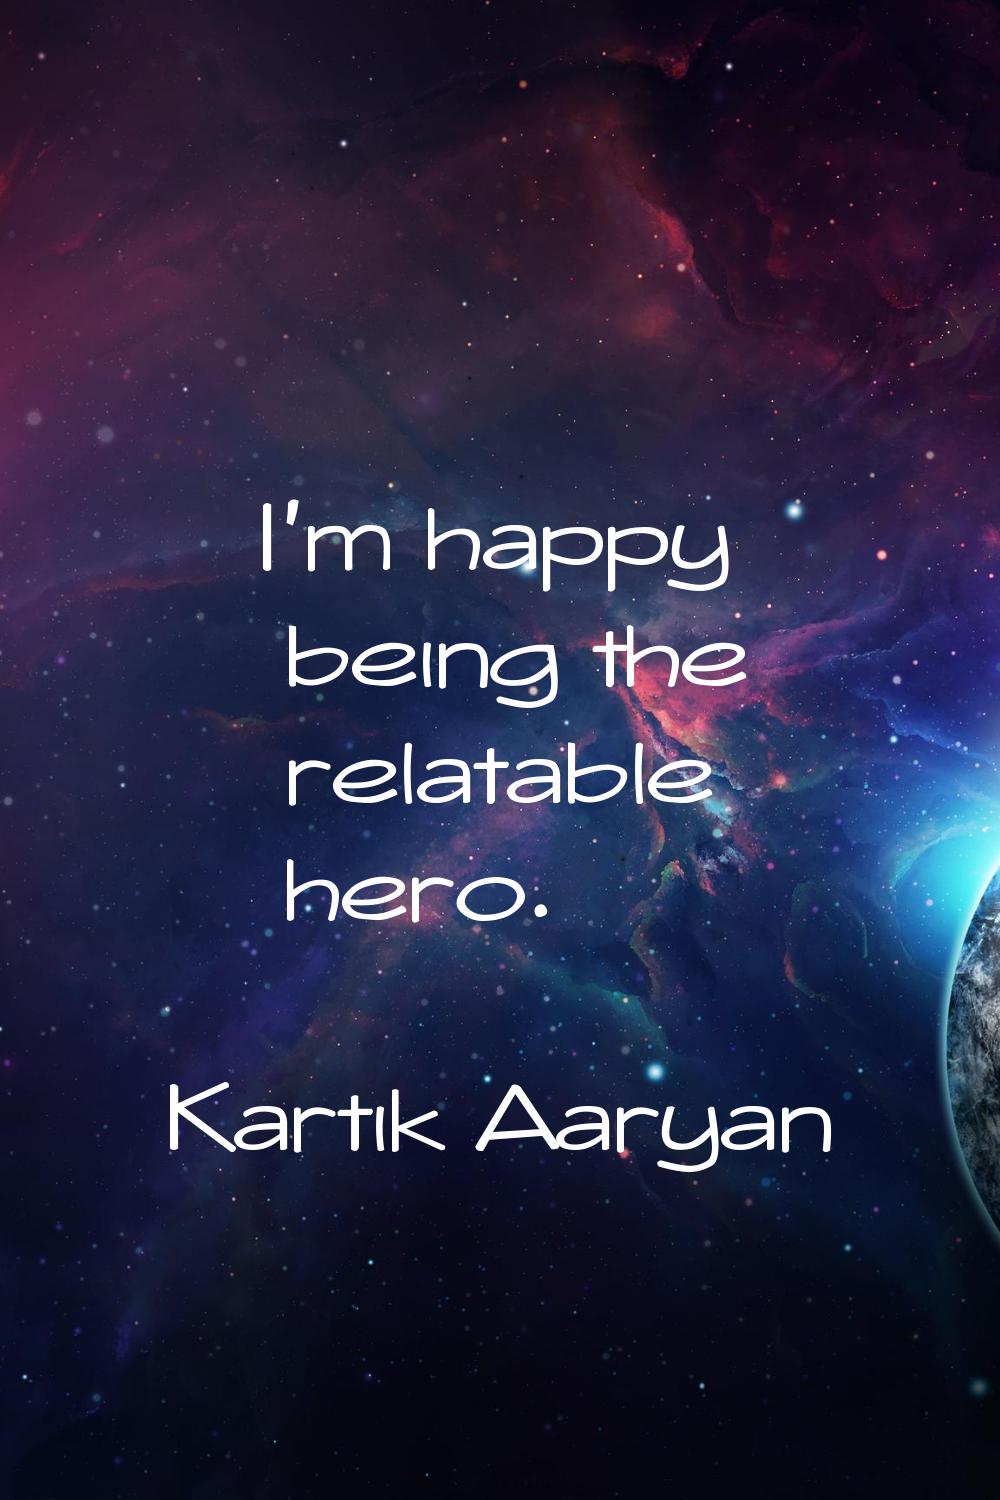 I'm happy being the relatable hero.